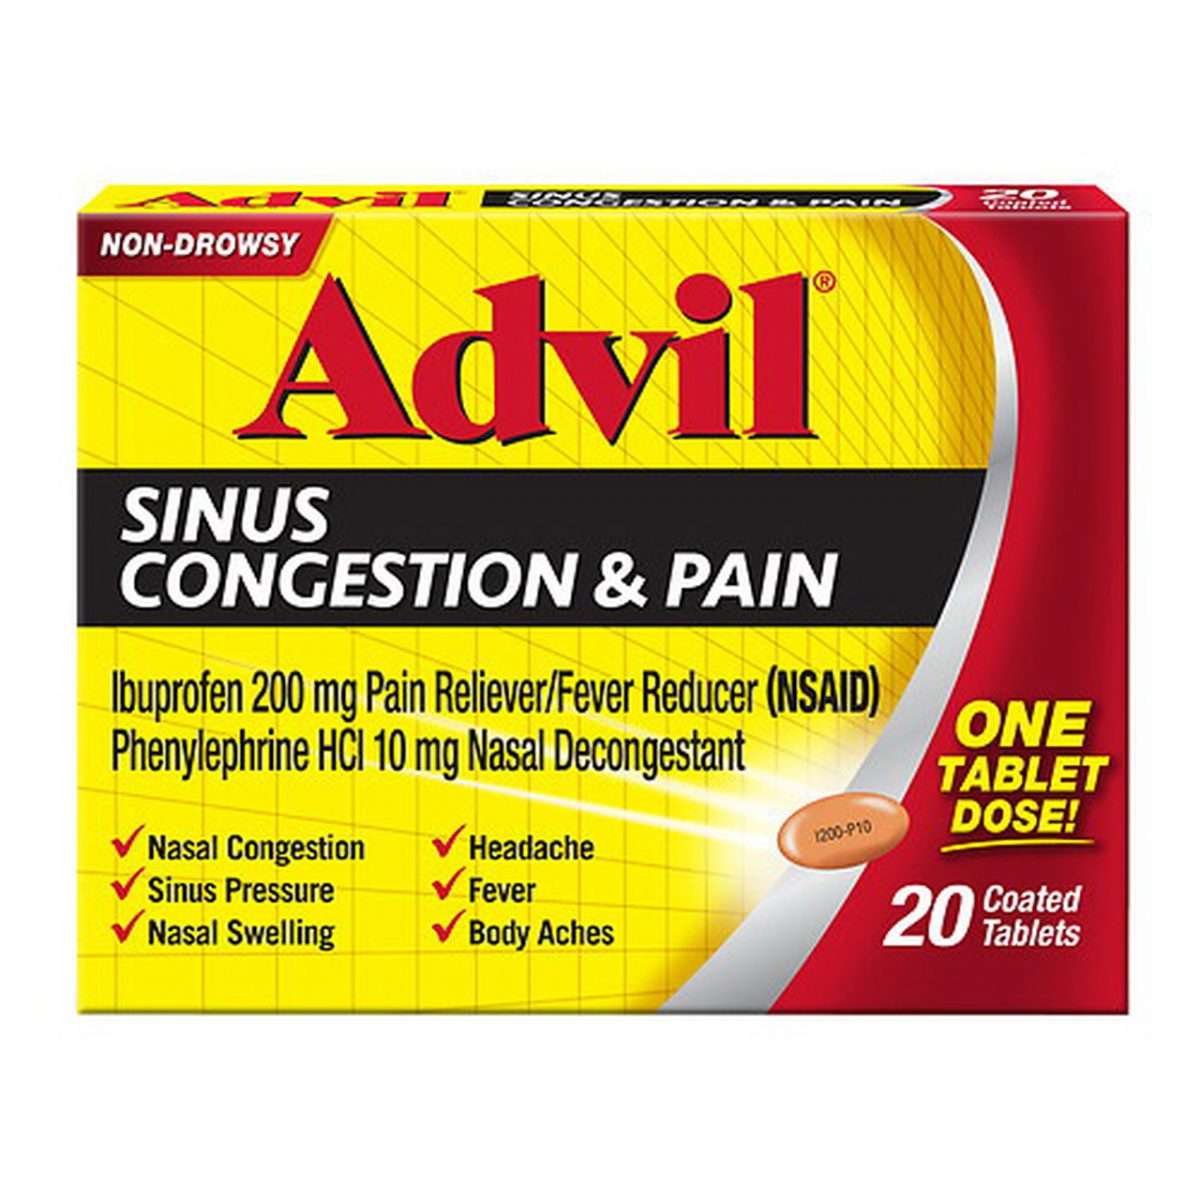 Advil Sinus Congestion and Pain Coated Tablets, Non